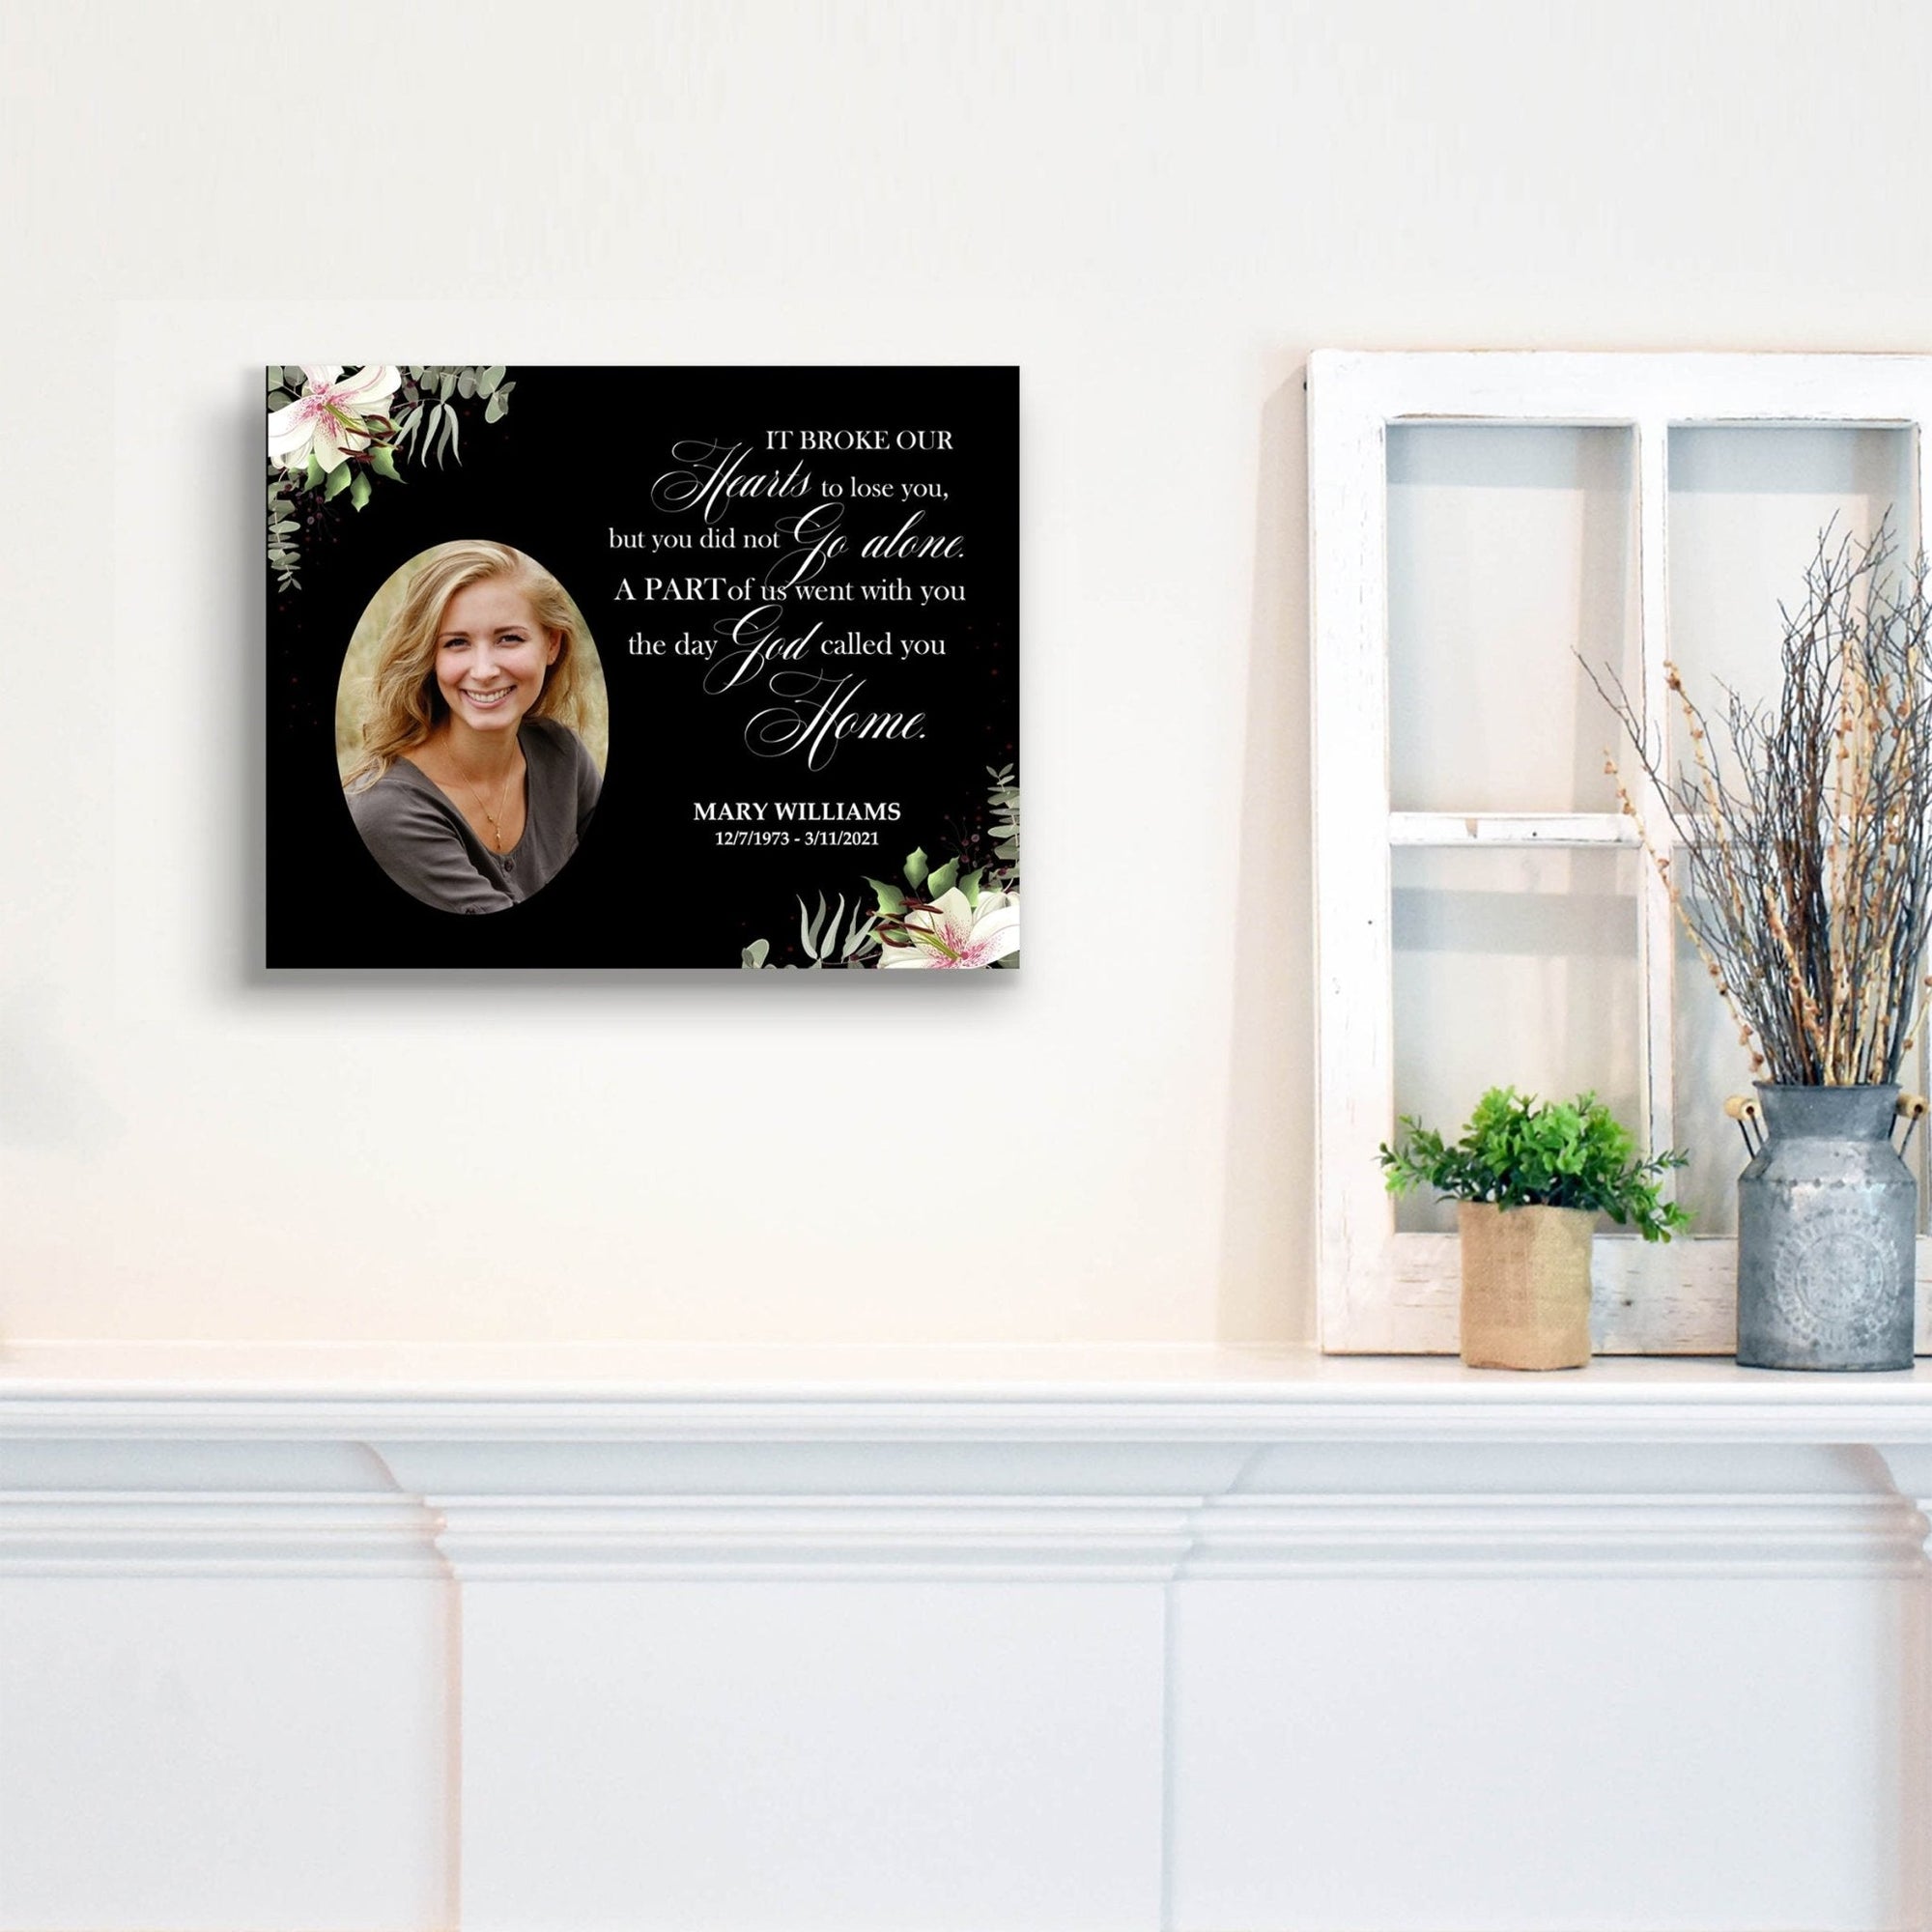 Personalized Human Memorial Black Photo & Inspirational Verse Bereavement Wall Décor & Sympathy Gift Ideas - It Broke Our Heart - LifeSong Milestones